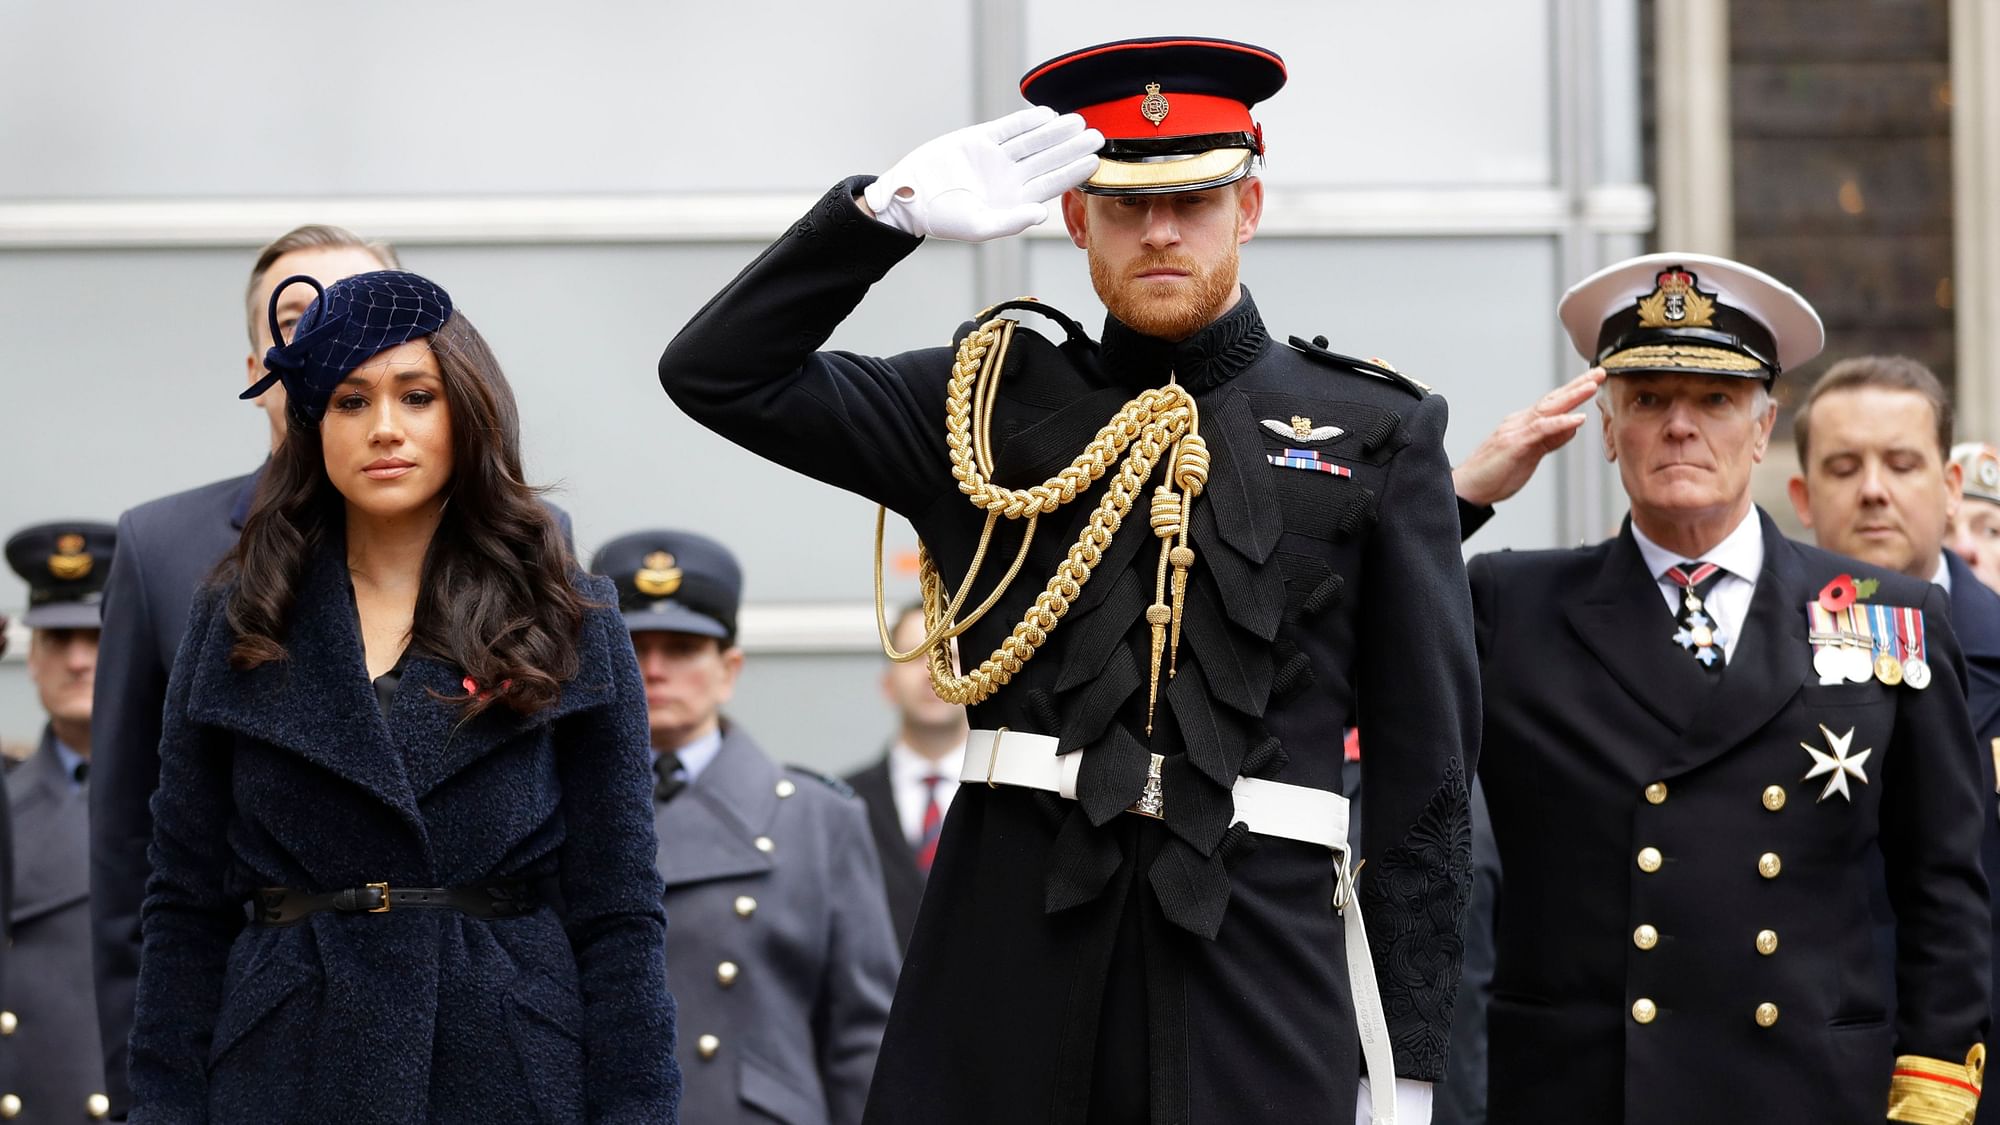 Harry, 35, is a grandson of Queen Elizabeth II and is sixth in line to the British throne.